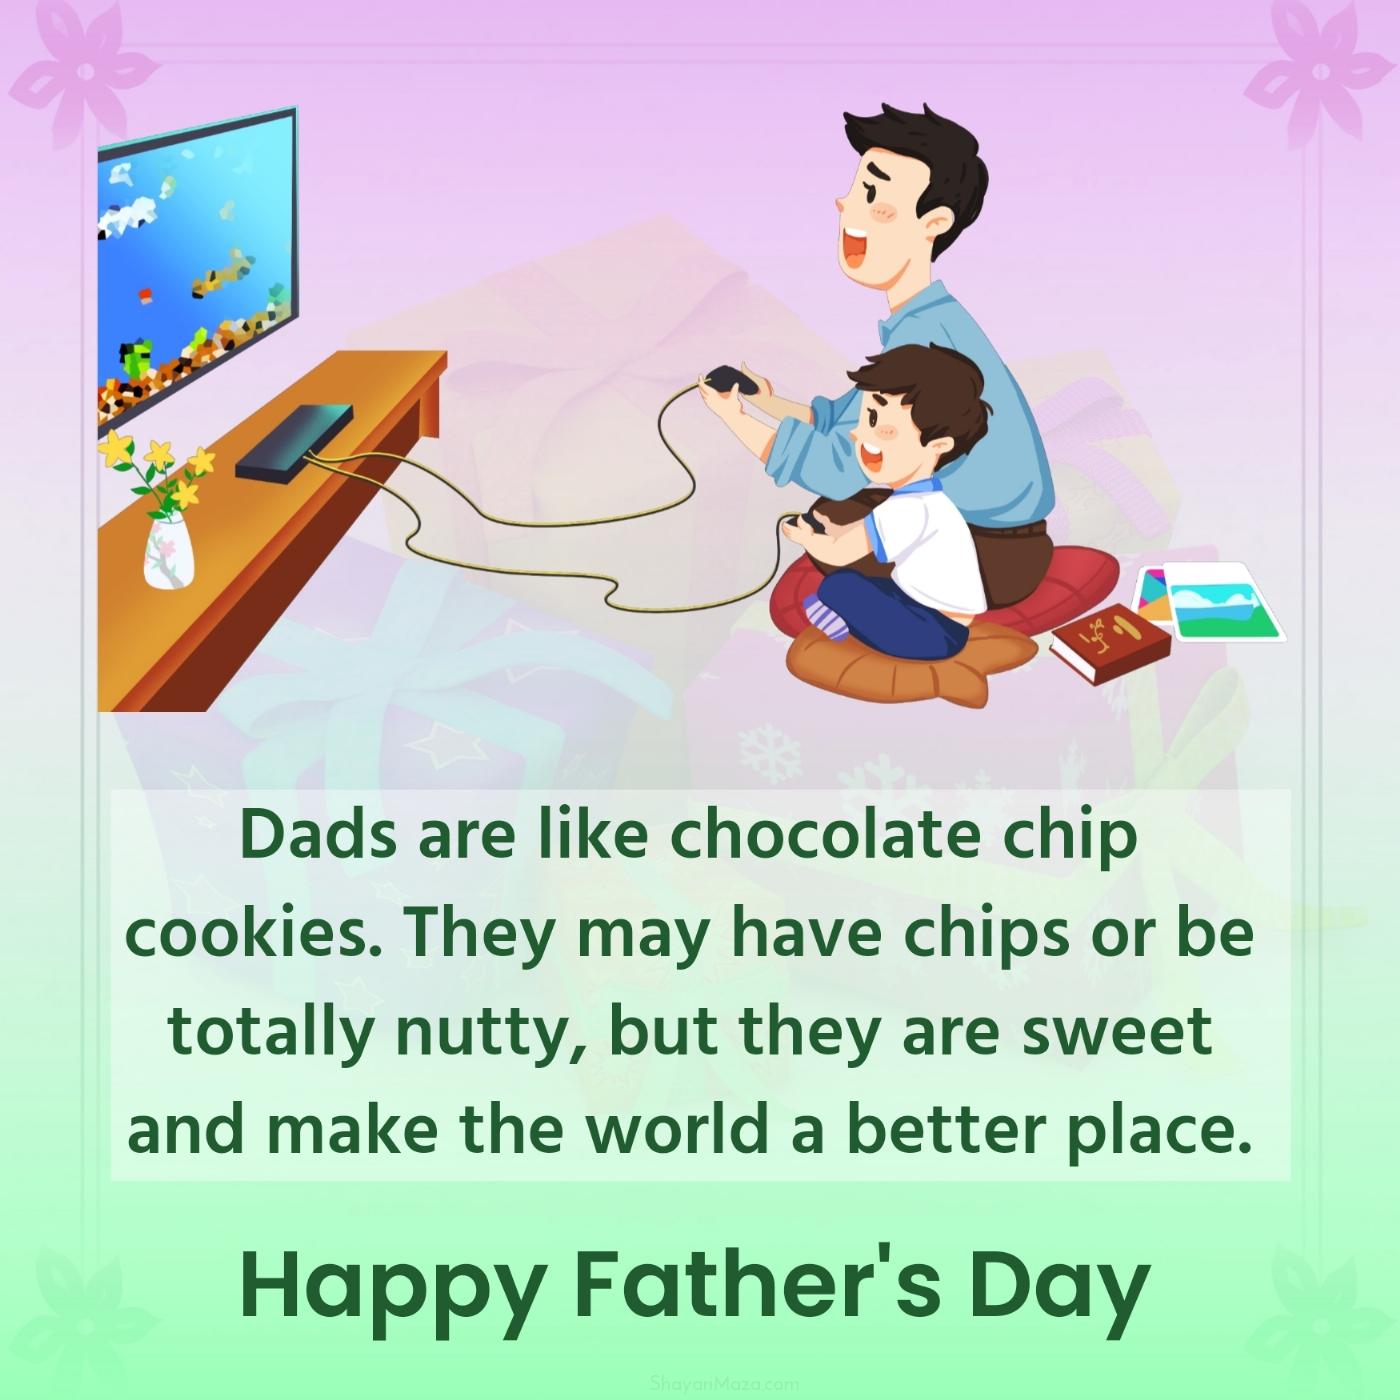 Dads are like chocolate chip cookies